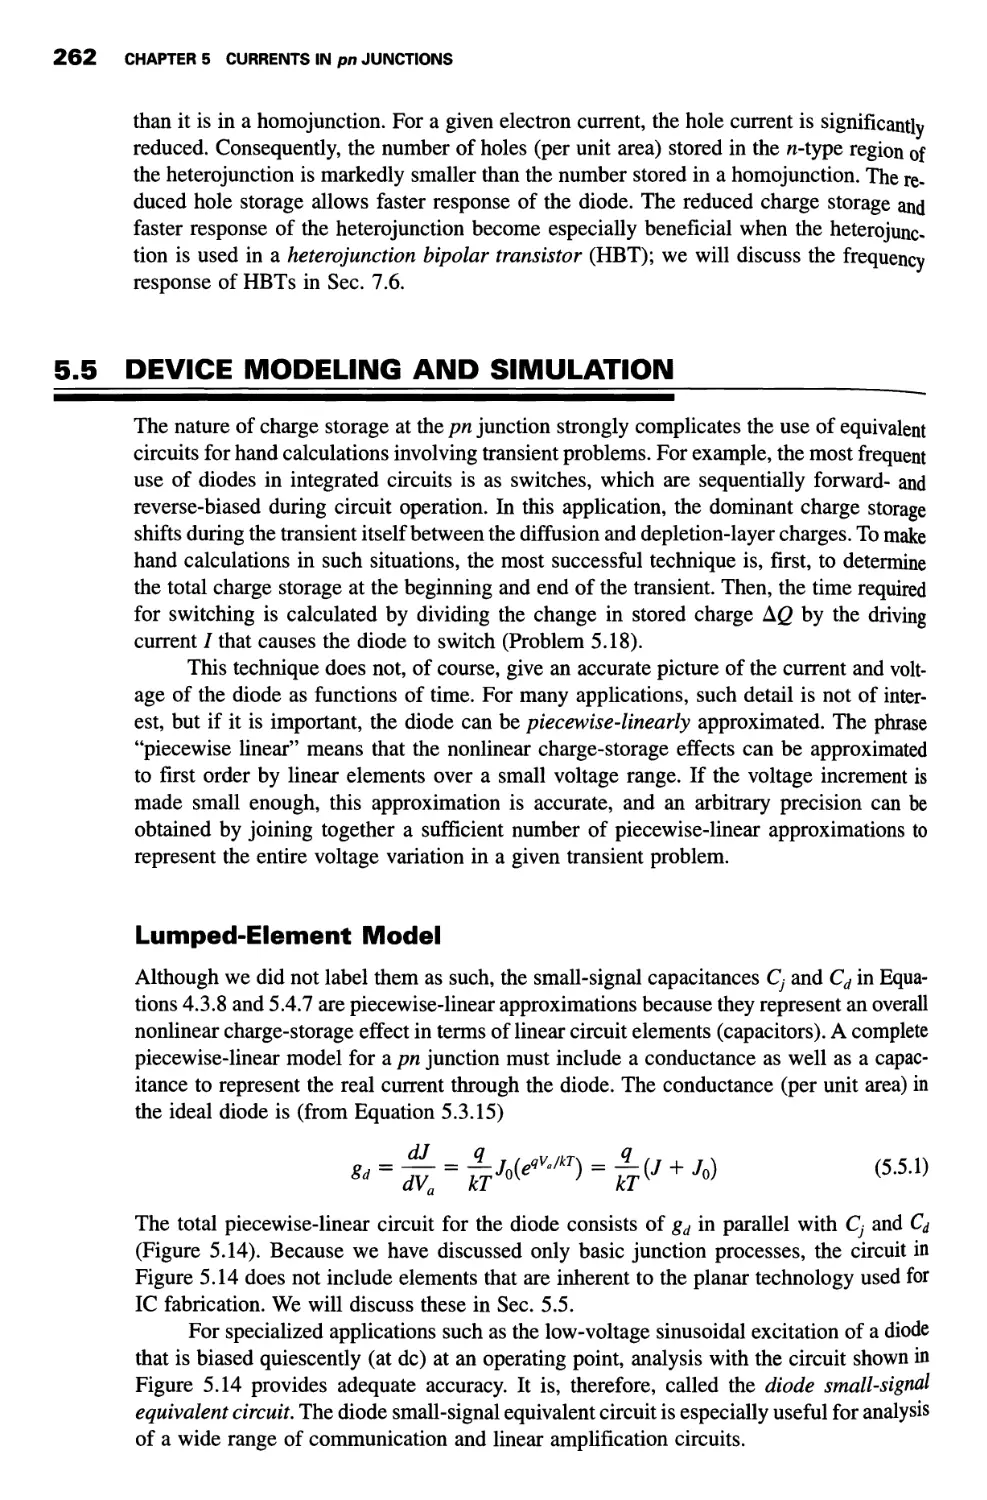 5.5 Device Modeling and Simulation